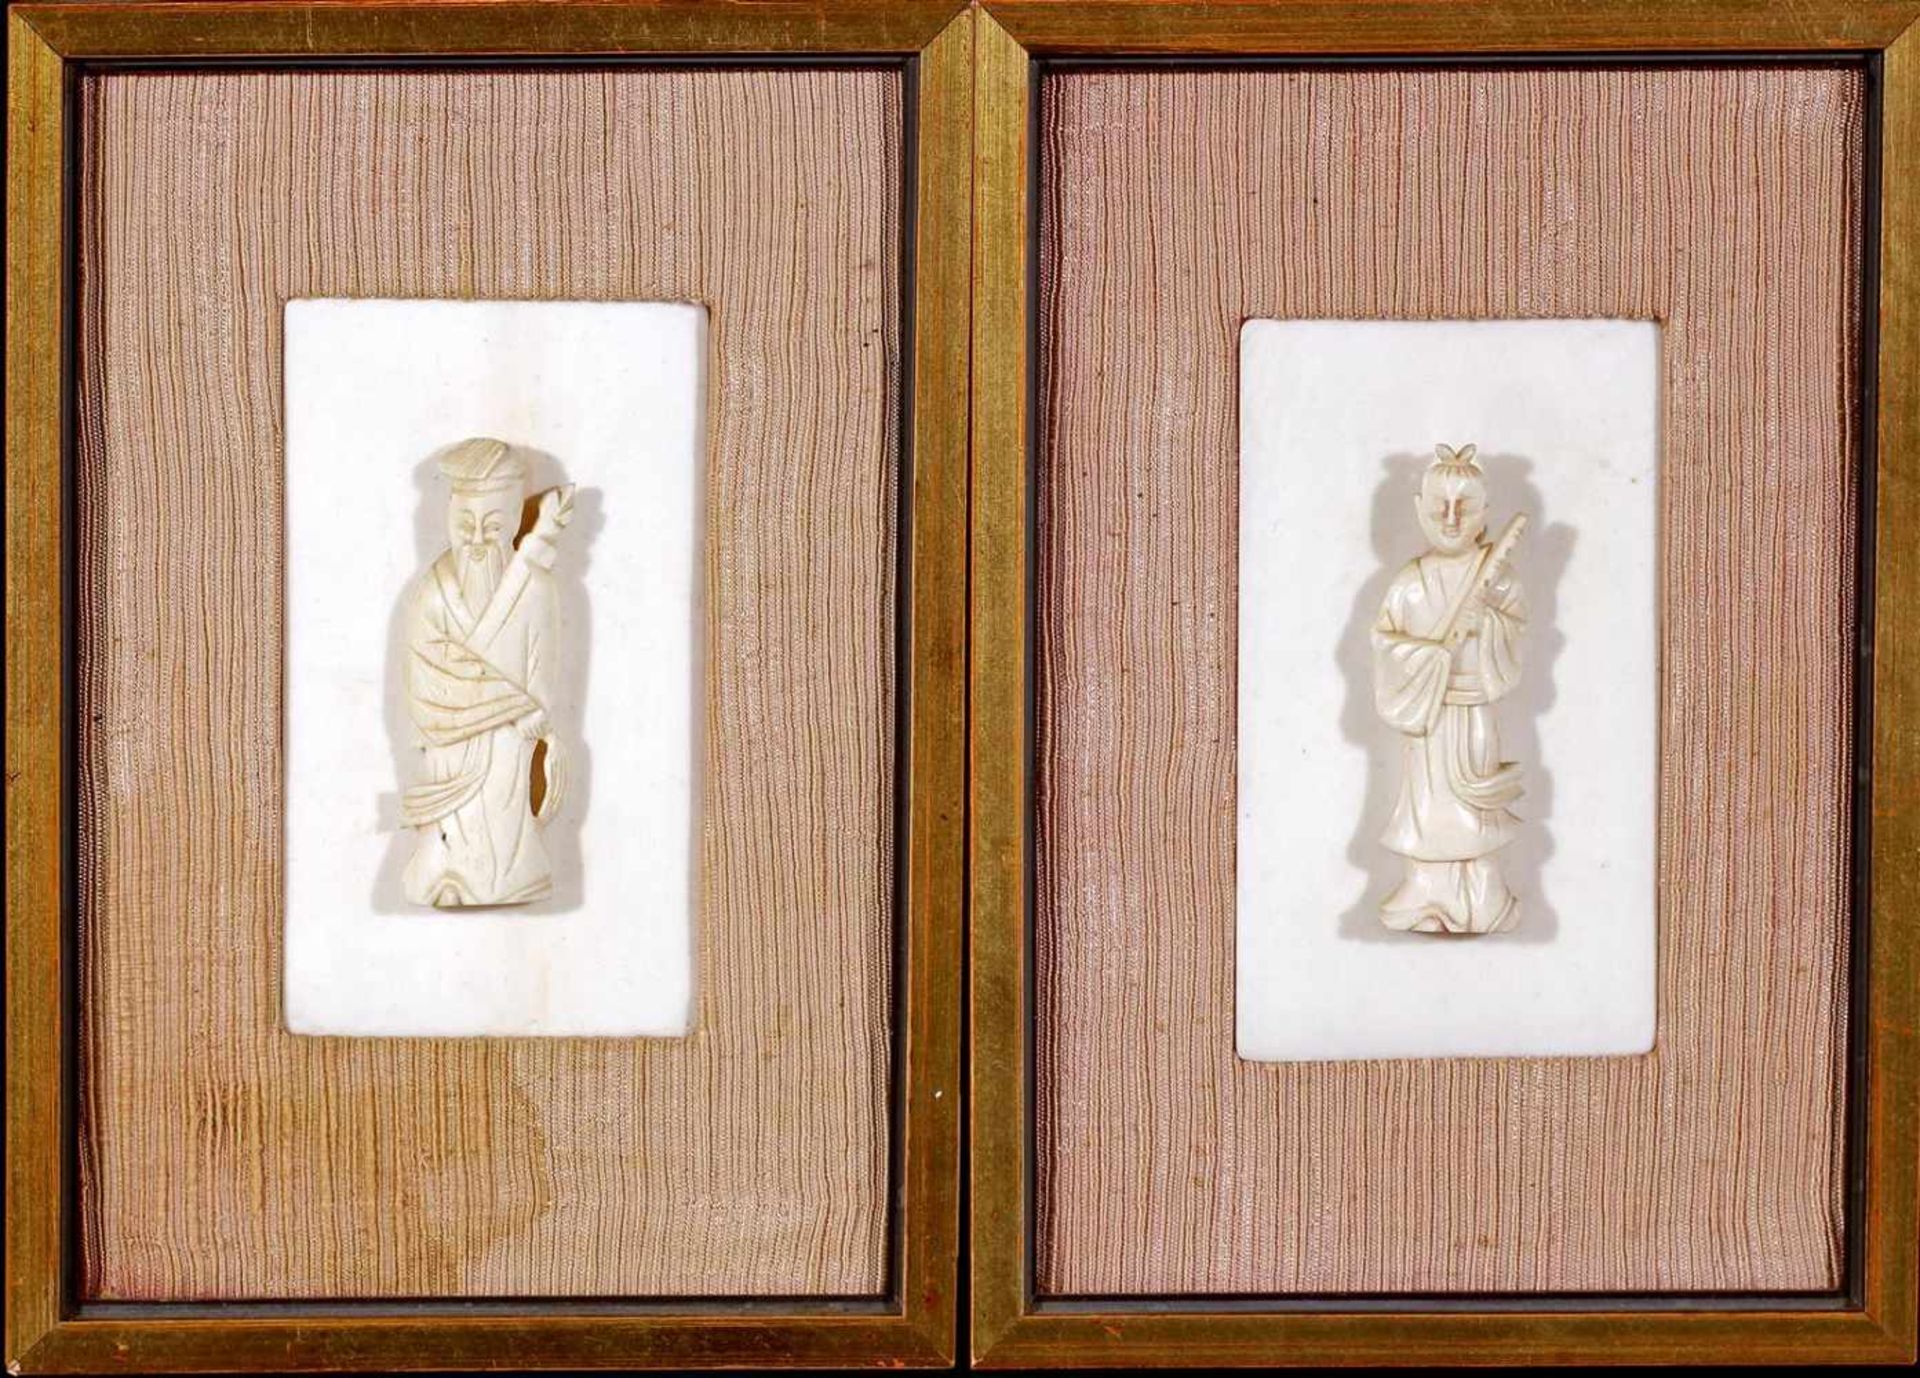 2 ivory tablets in frame with therefore a carved ivory statue of a person, China ca.1880, ivory is